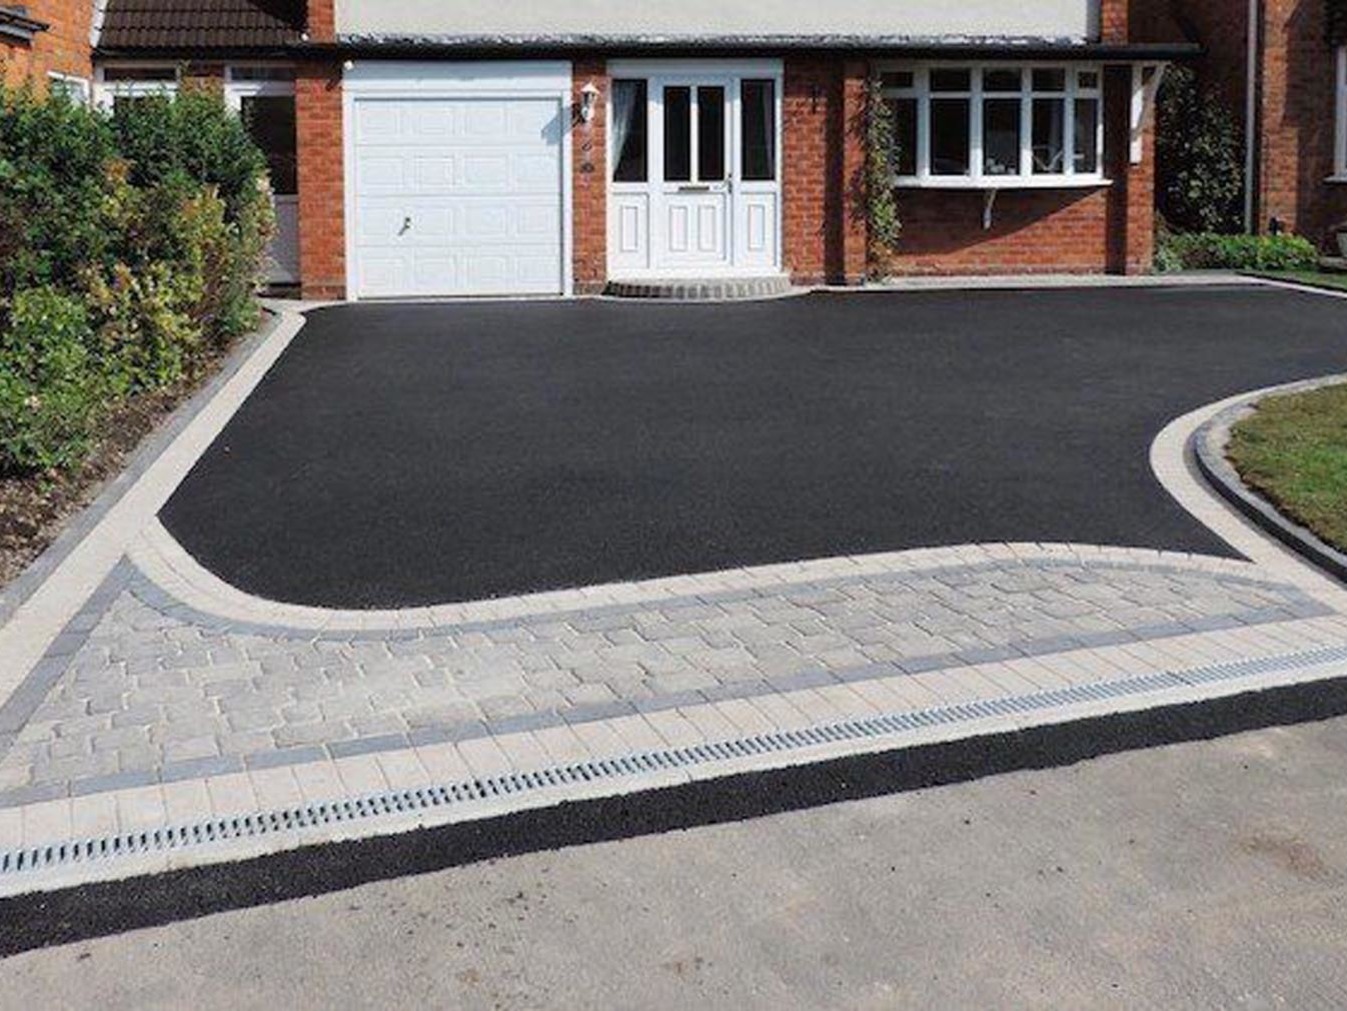 Cambs Paving - Tarmac specialists in Ely